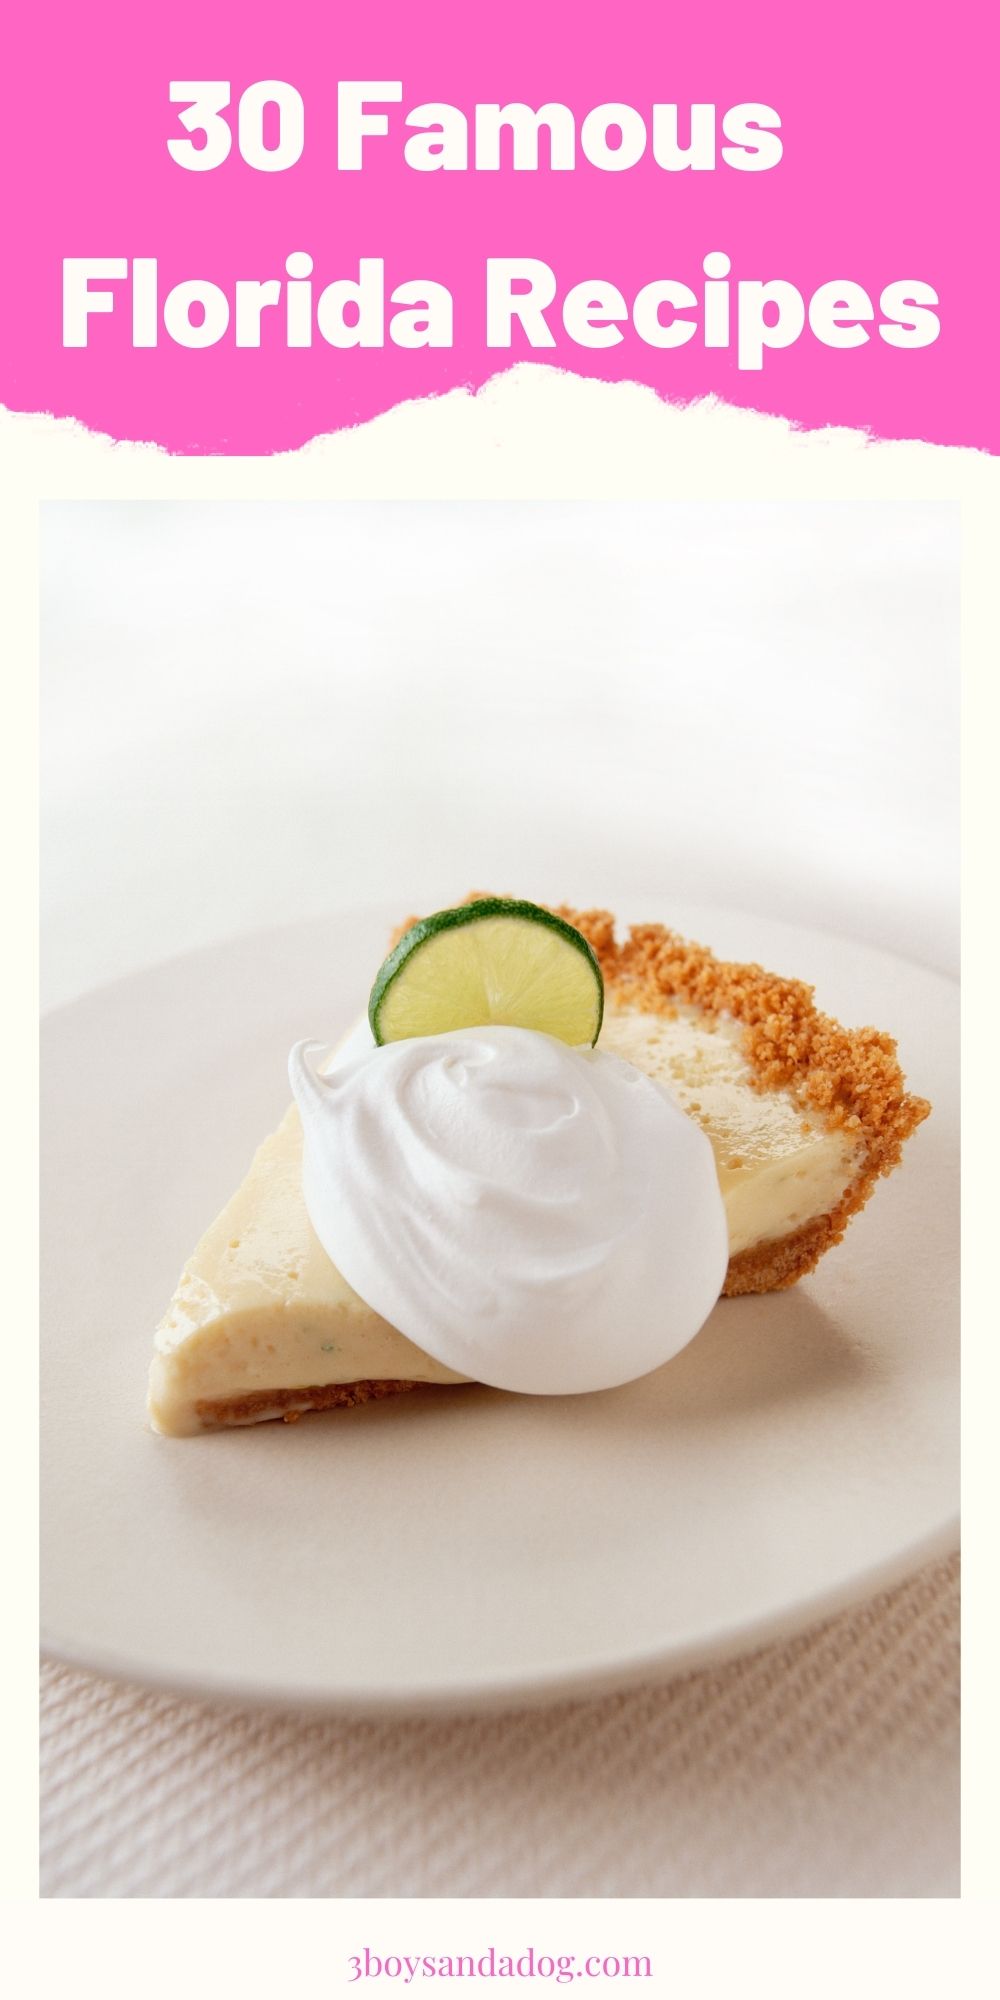 pin with image of a slice of key lime pie on a white plate